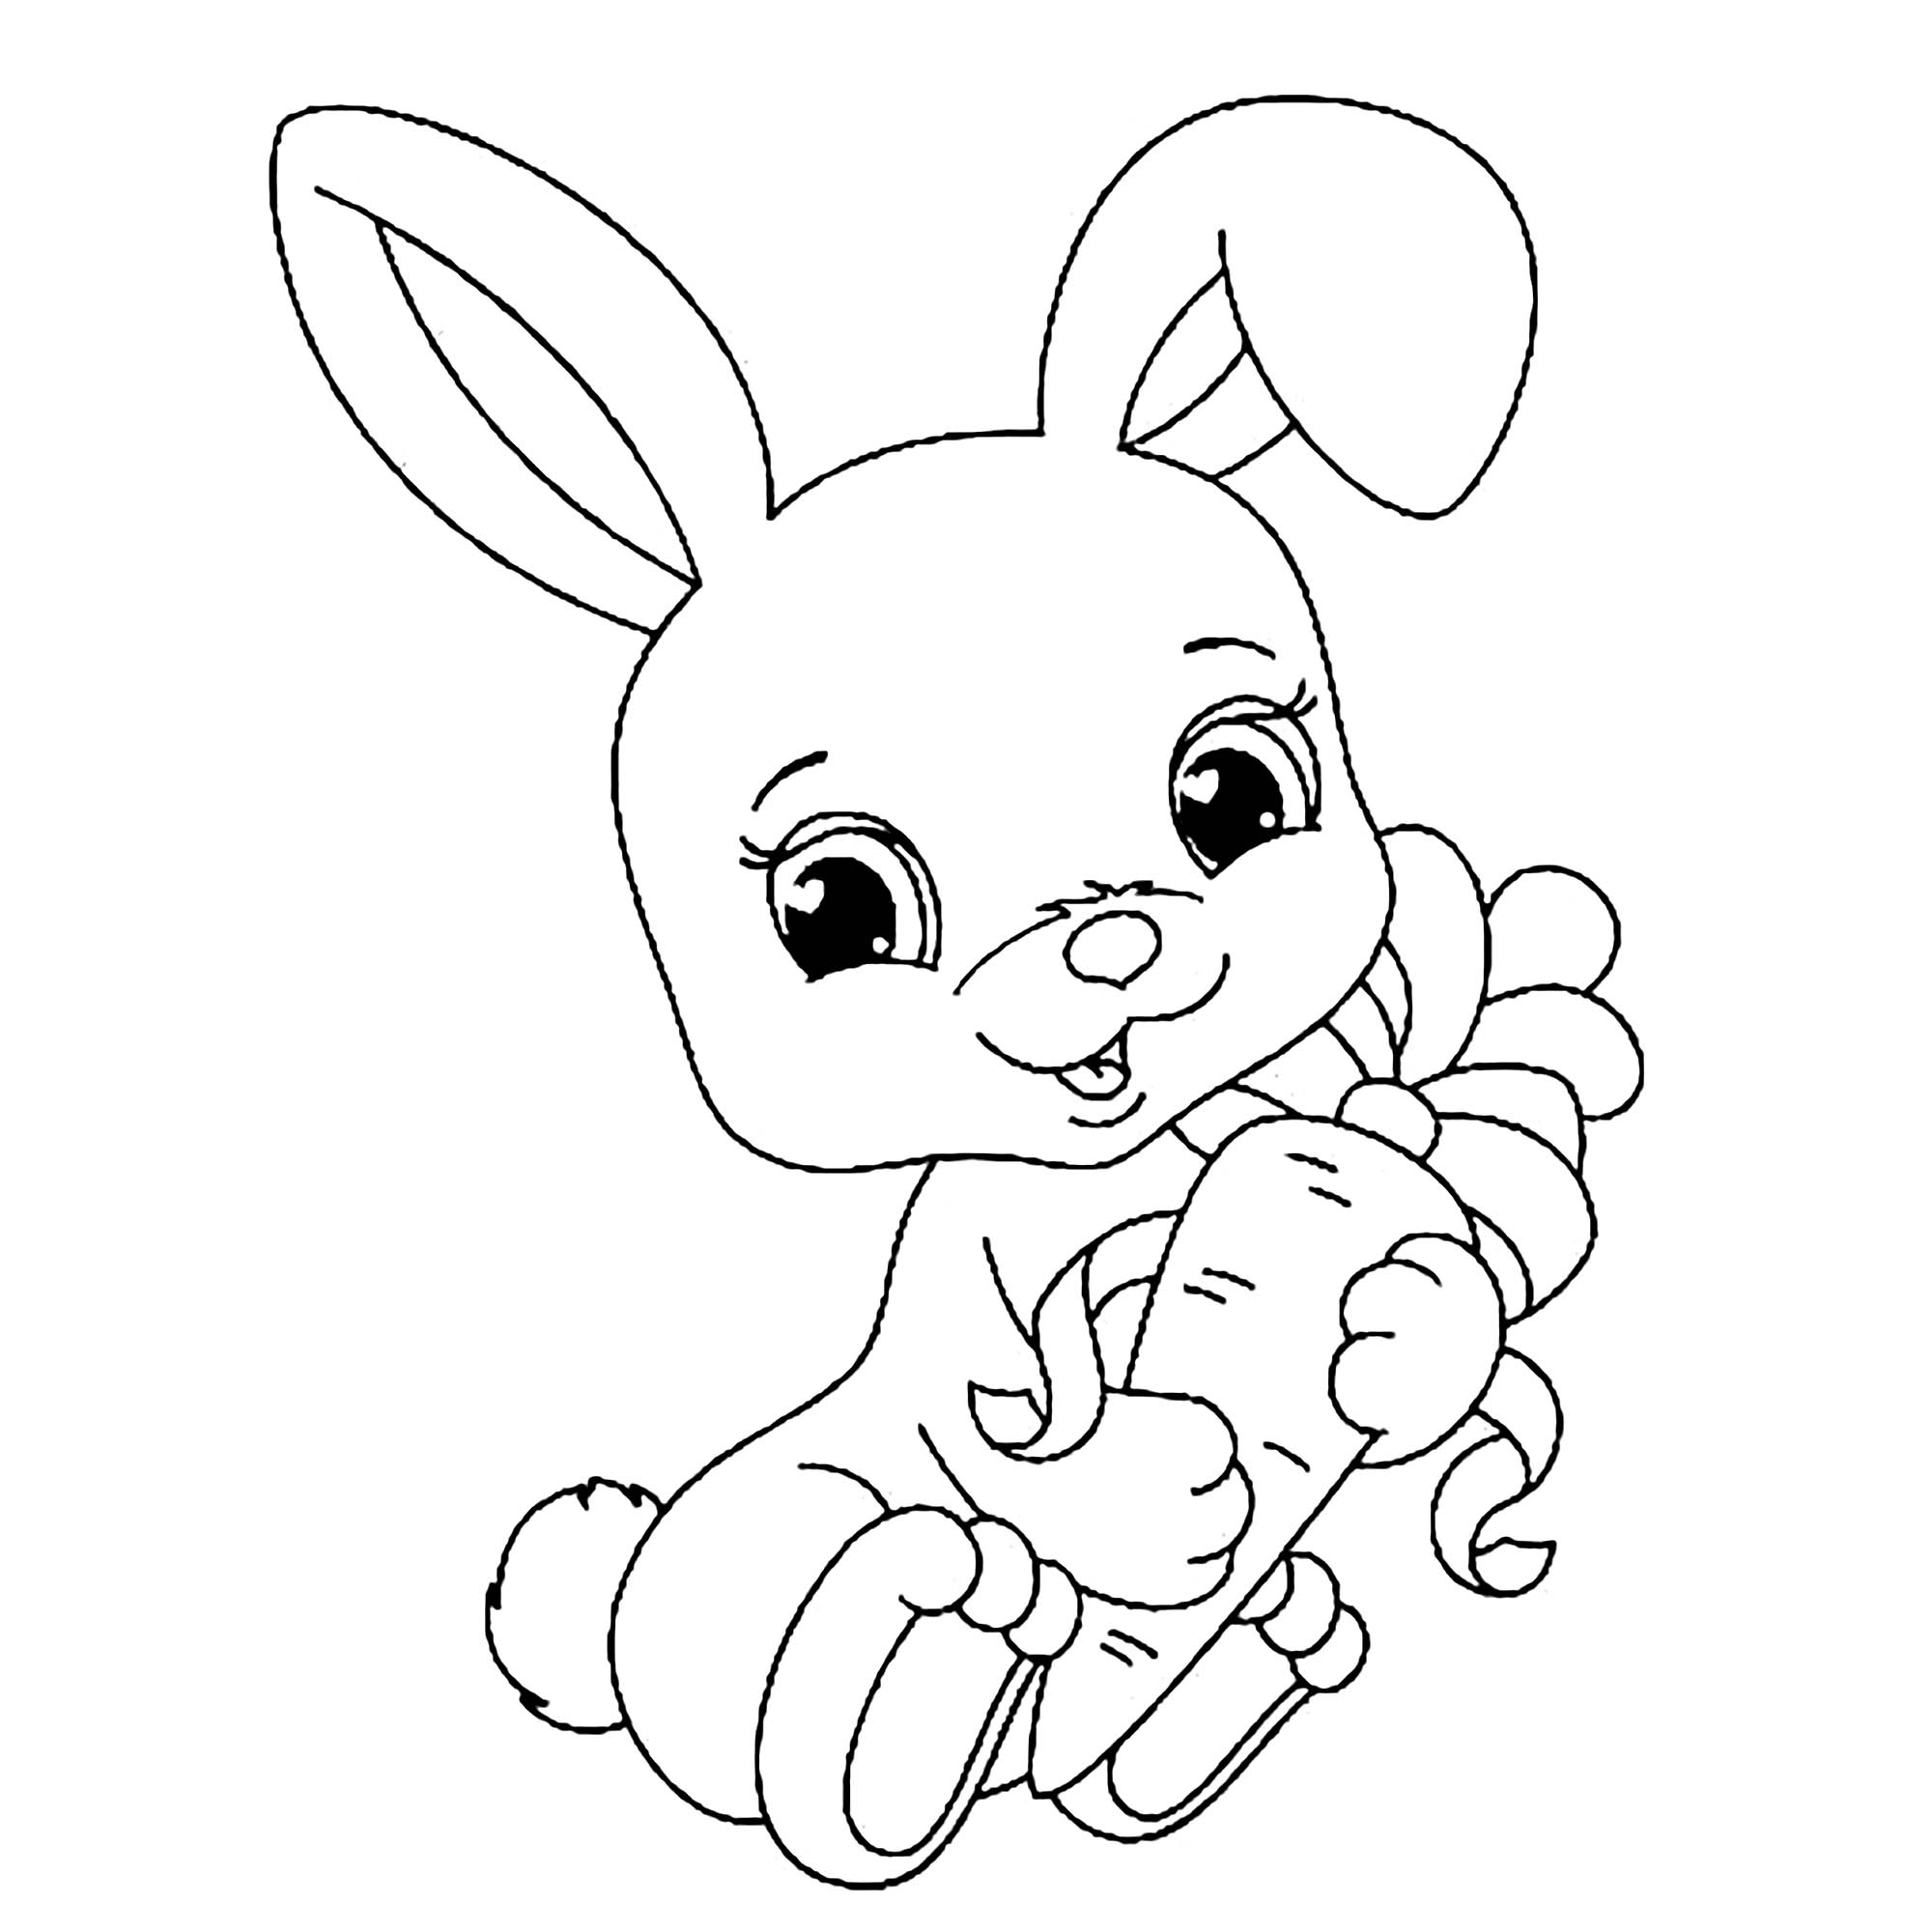 Rabbit-free-to-color-for-children - Rabbit Kids Coloring Pages